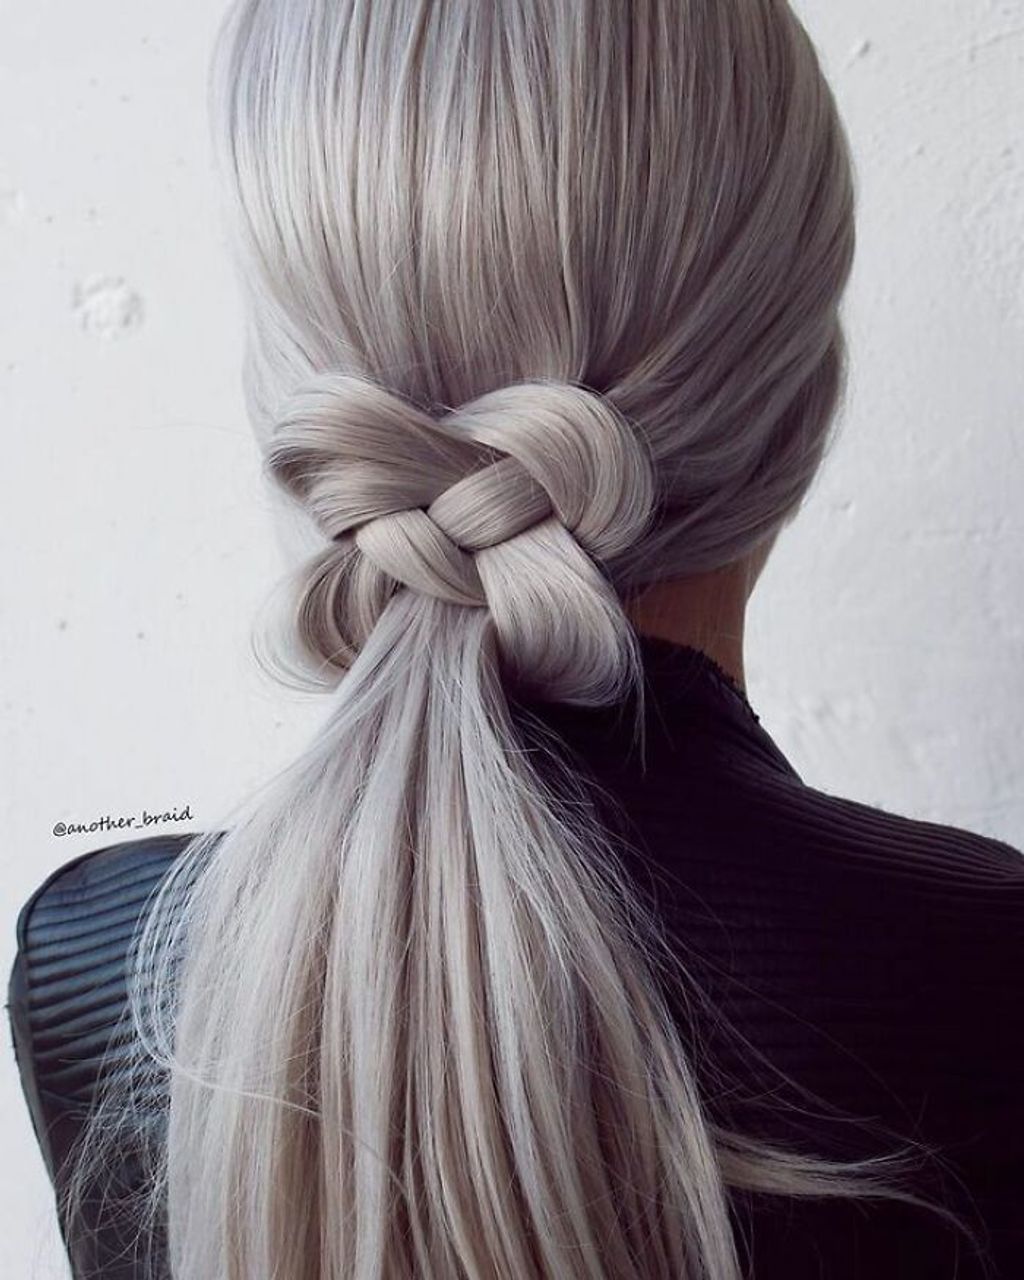 Forrás: Instagram/another_braid